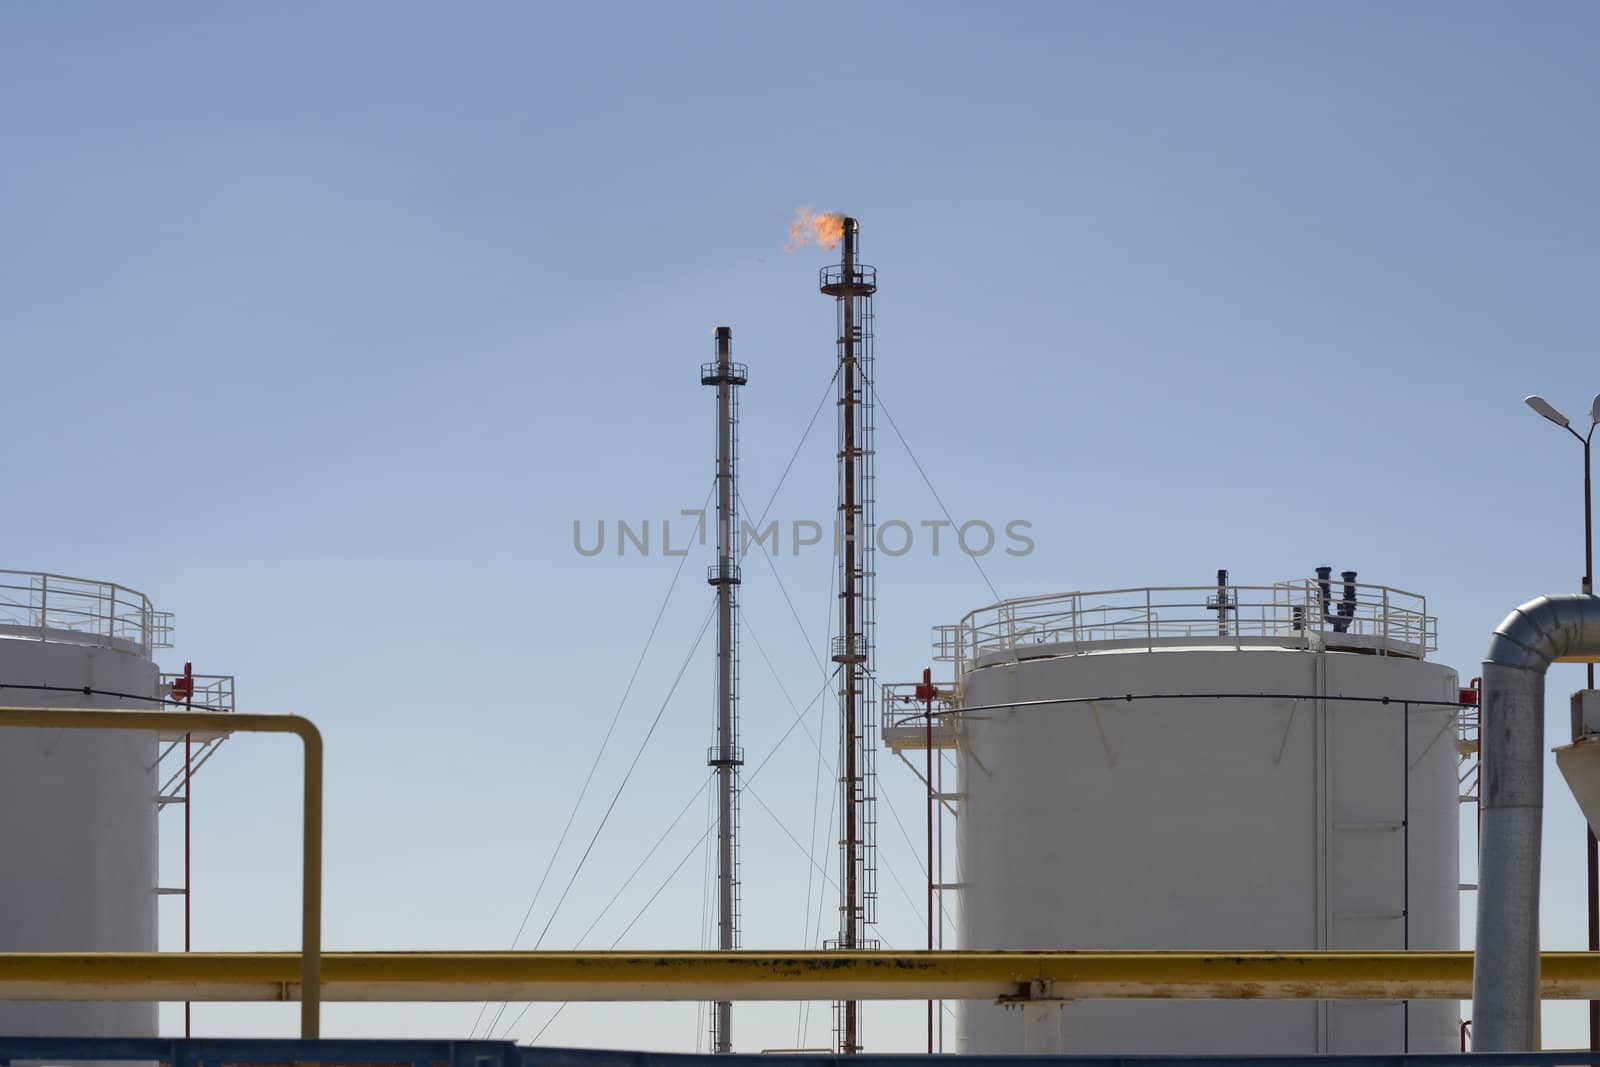 Storage tanks and gas towers with burning flames at an industrial petrochemical plant extracting fossil fuel from the earth